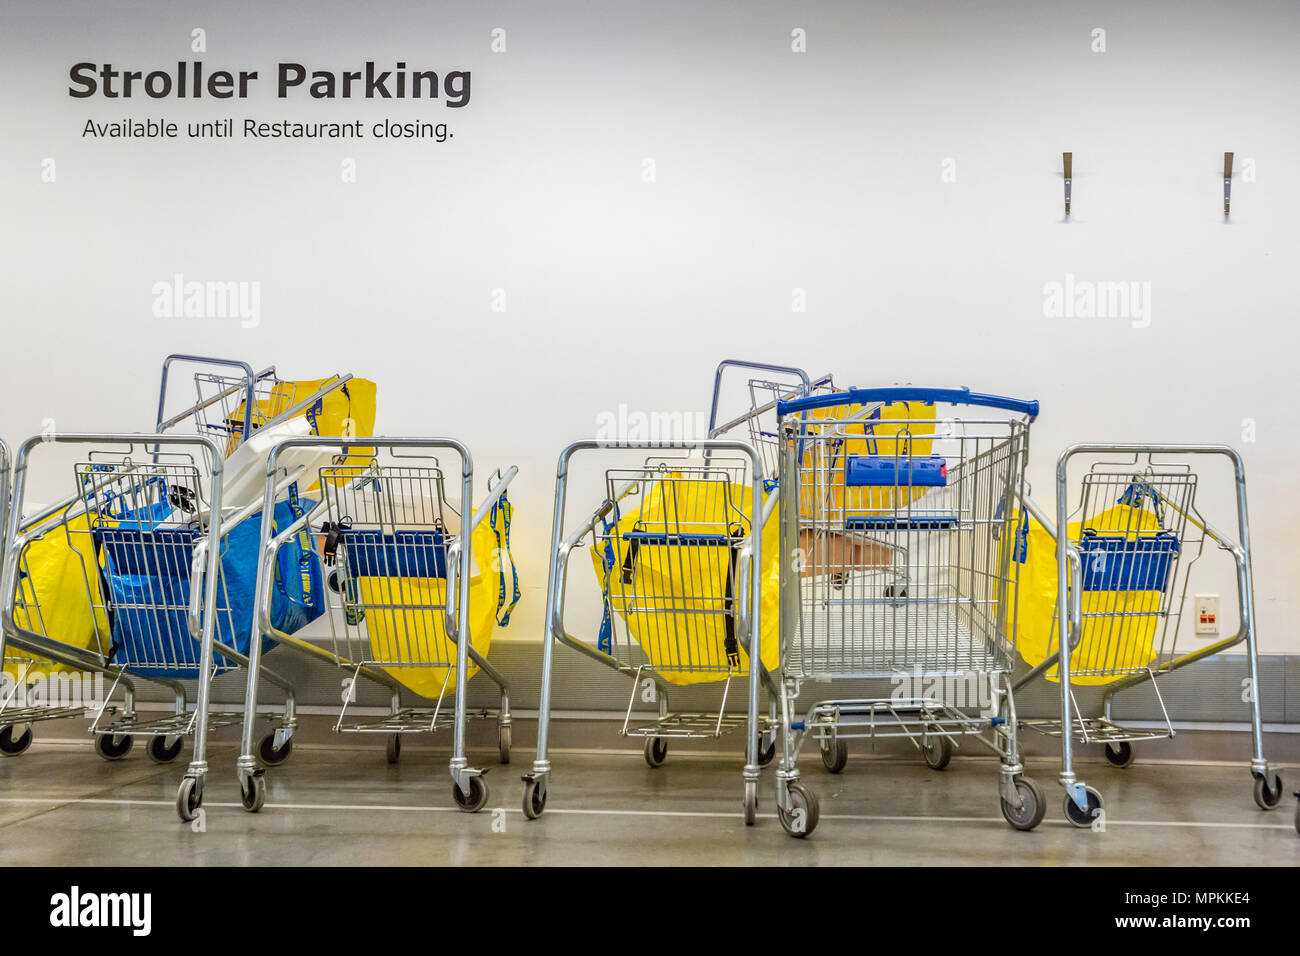 Shopping carts under a Stroller Parking sign inside an Ikea store in the US Stock Photo